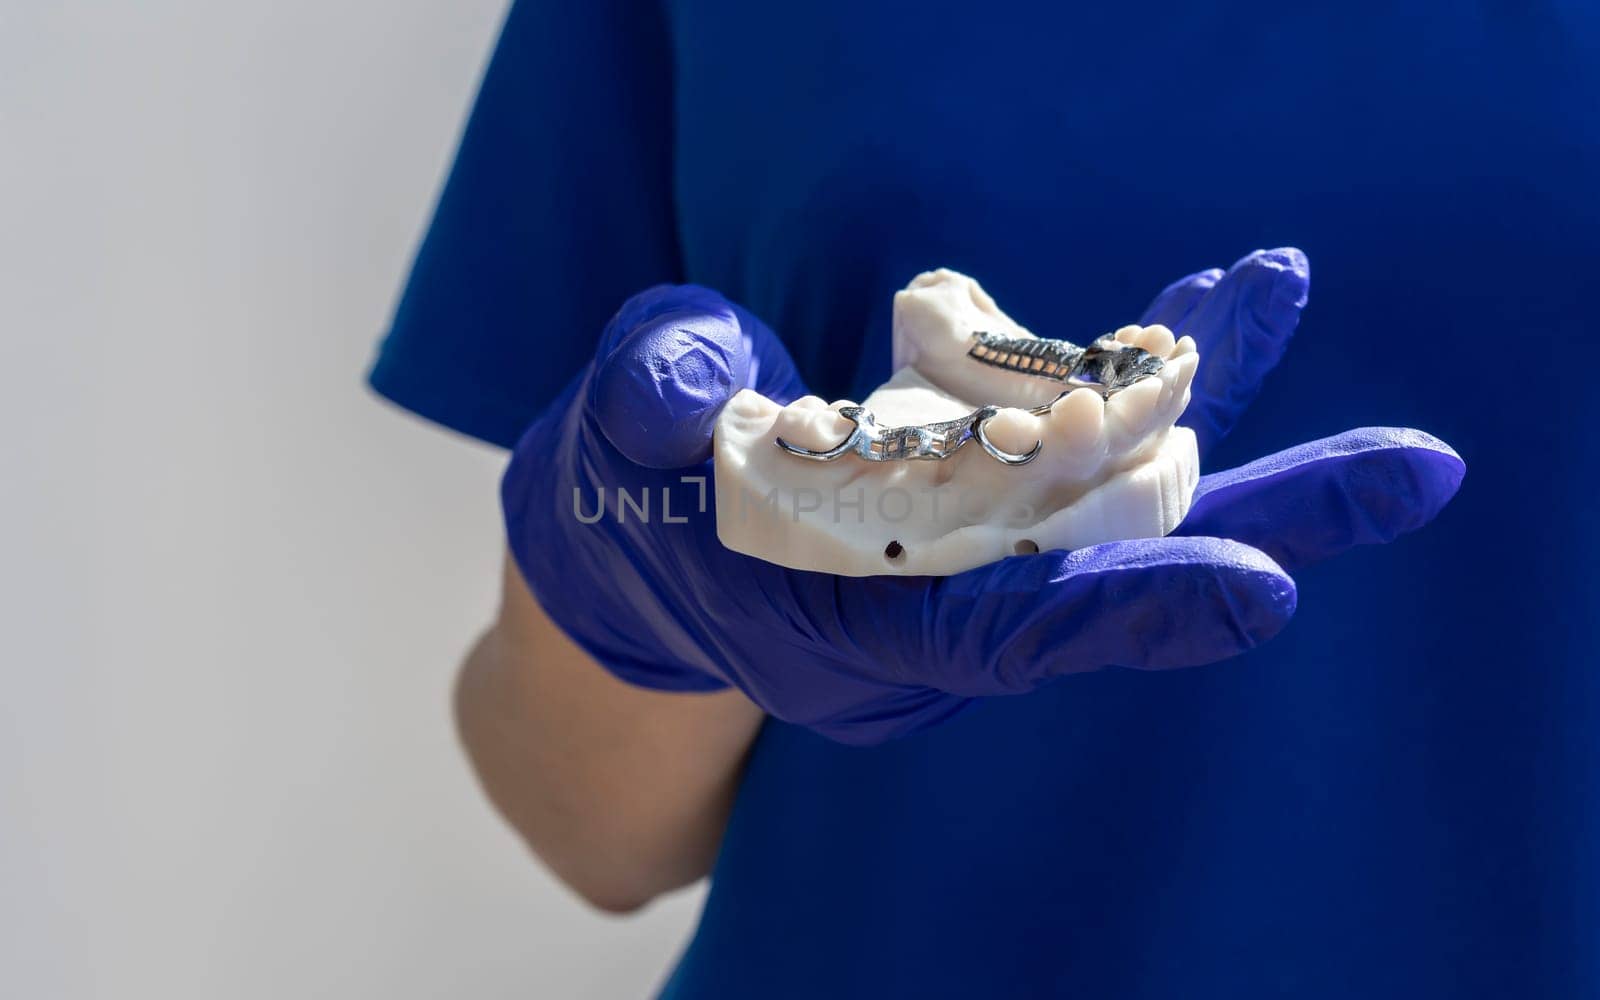 Cropped Doctor with Metal Frame Lower Partial Denture with Die Stone, Plaster Cast Molds Of Lower Jaws in Gloved Hand on White Background, Cobalt Chrome Dental Plate, 3D Printed Bridge. Horizontal.